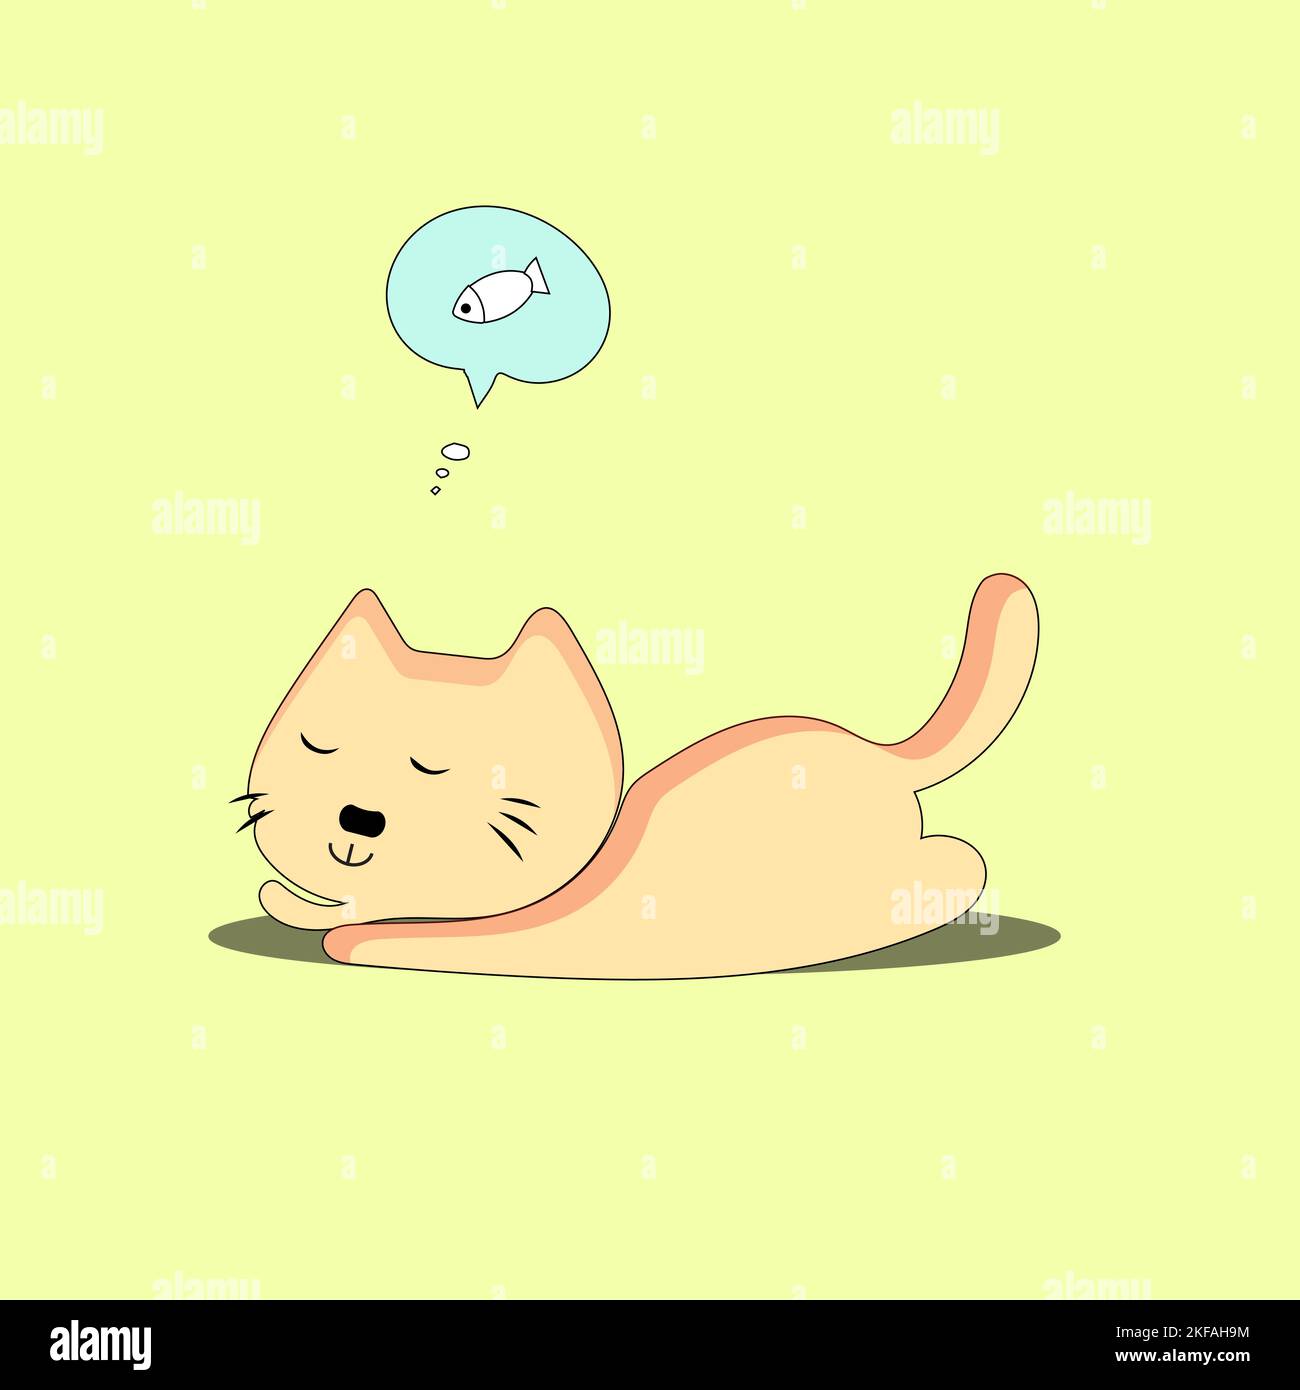 Vector illustration character cat sleeping. Cute kitty cat vector illustration set with different cat breeds, toys, and food. Draw doodle style. Stock Vector